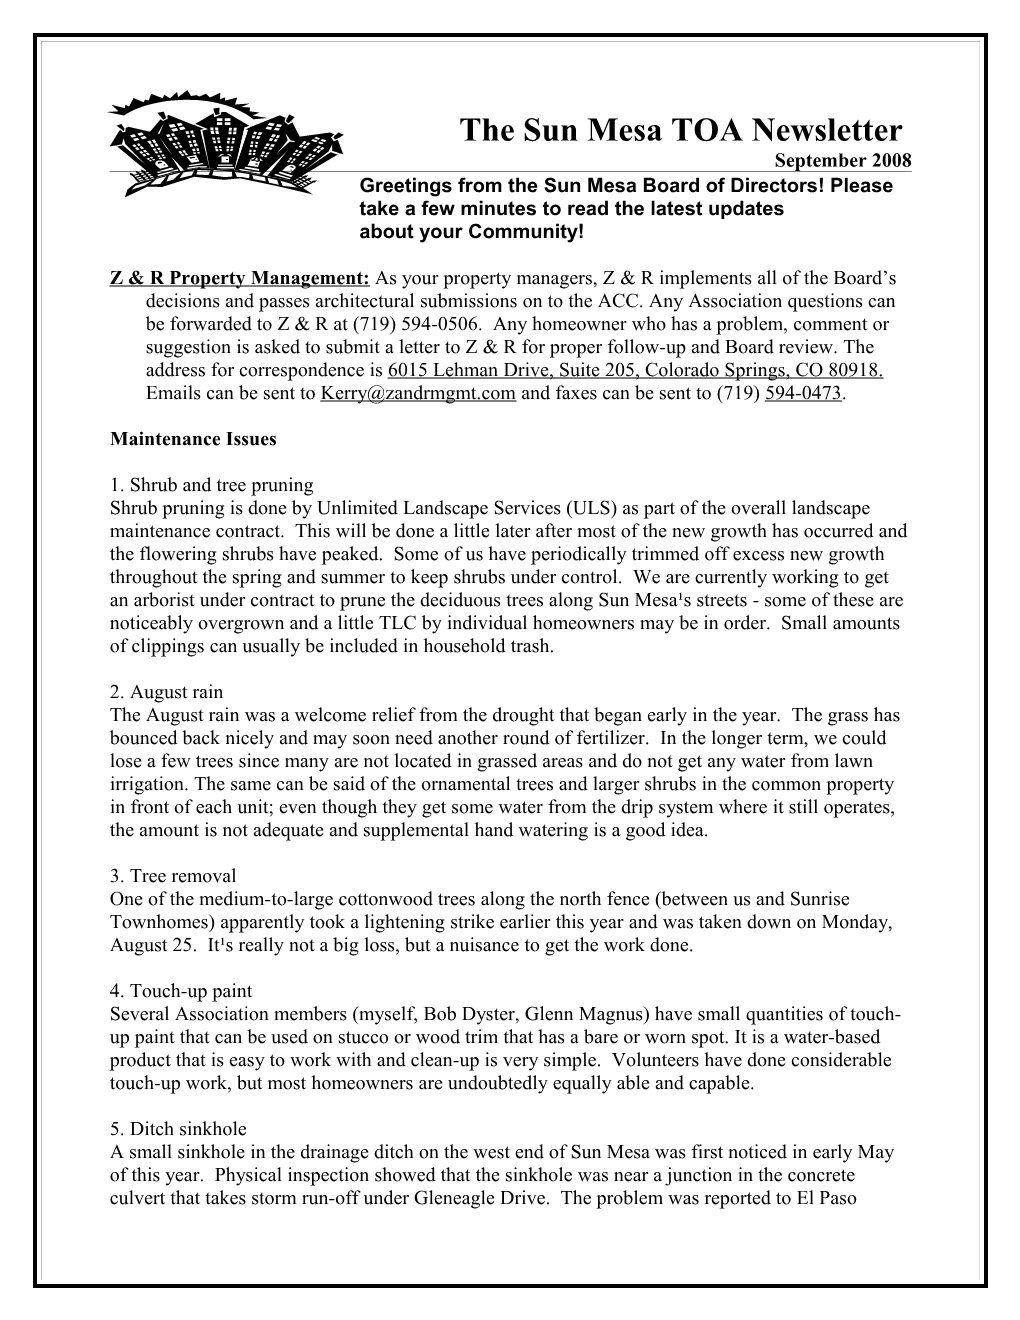 The Valley Park Newsletter Fall 1998